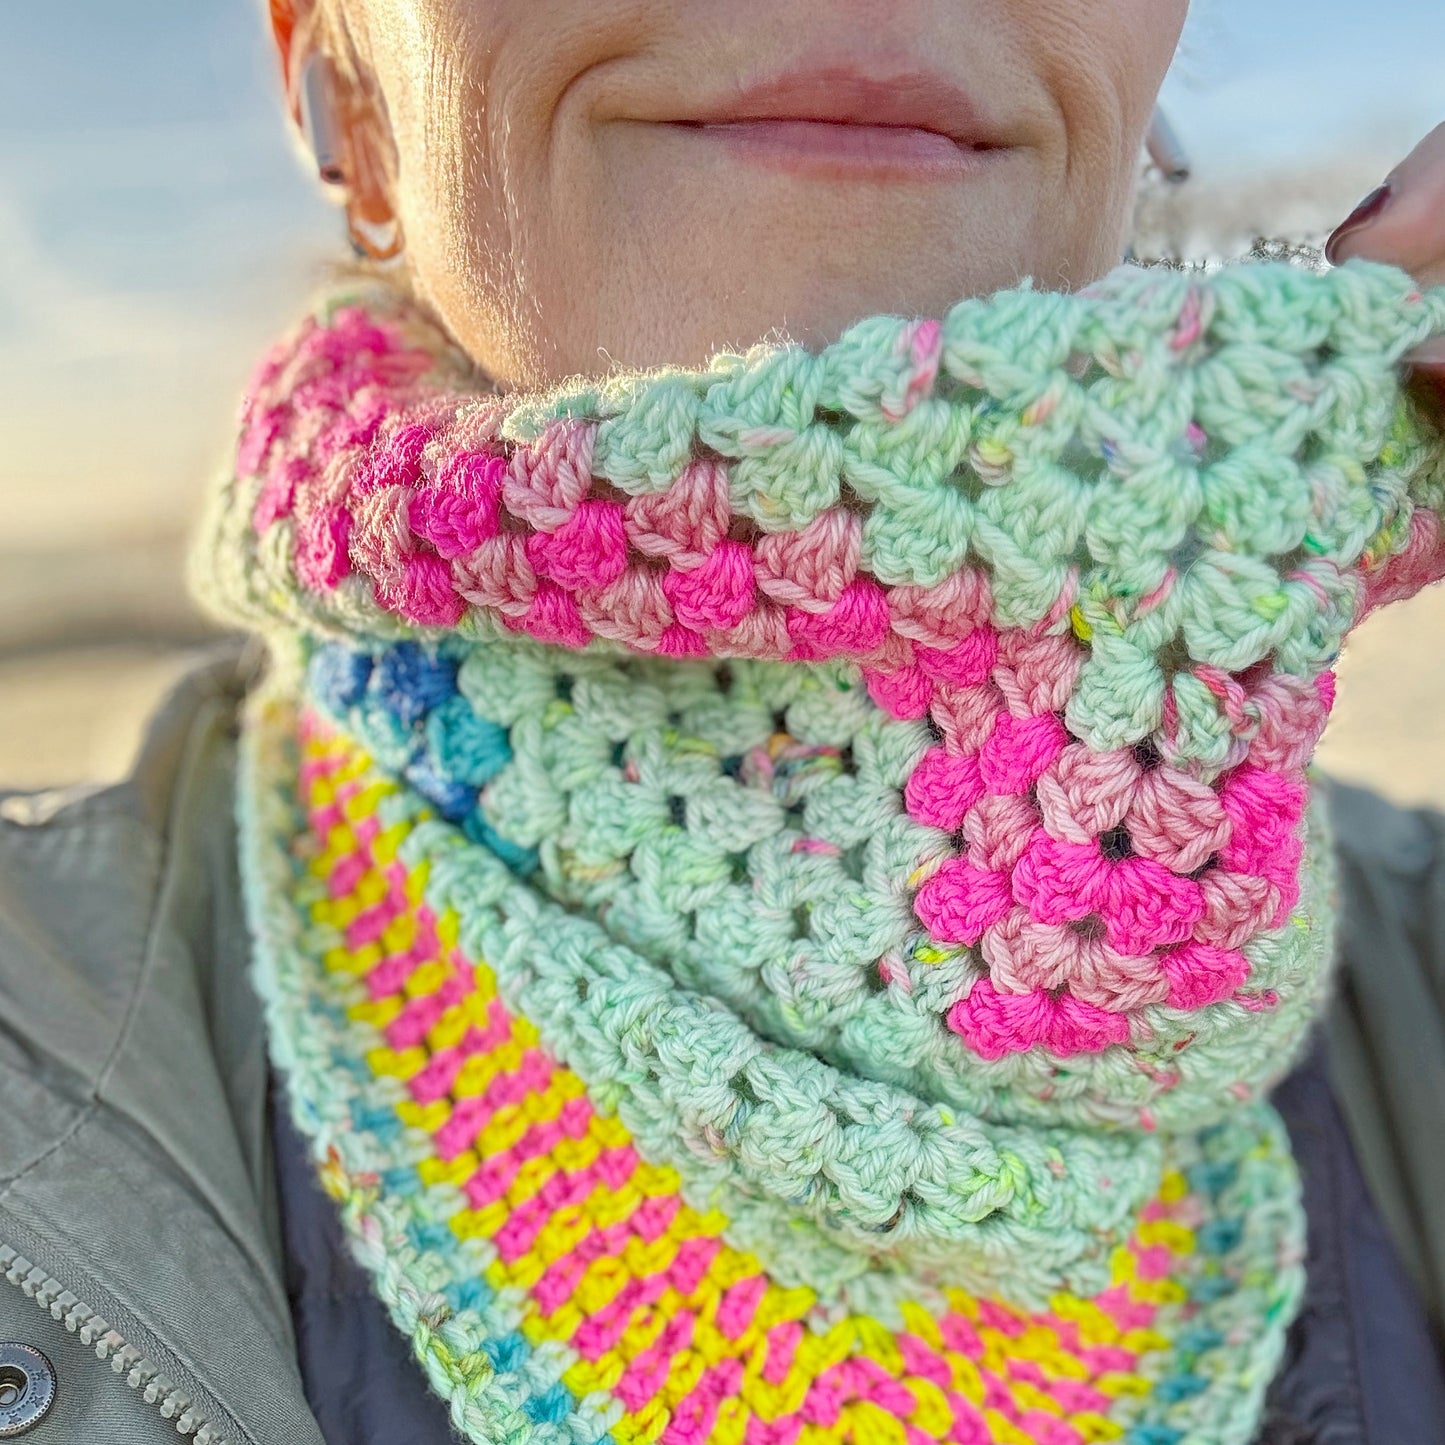 Granny Cowl Kit - Pattern by Zeens and Roger - Morning Mist at Combs / Bright Minis